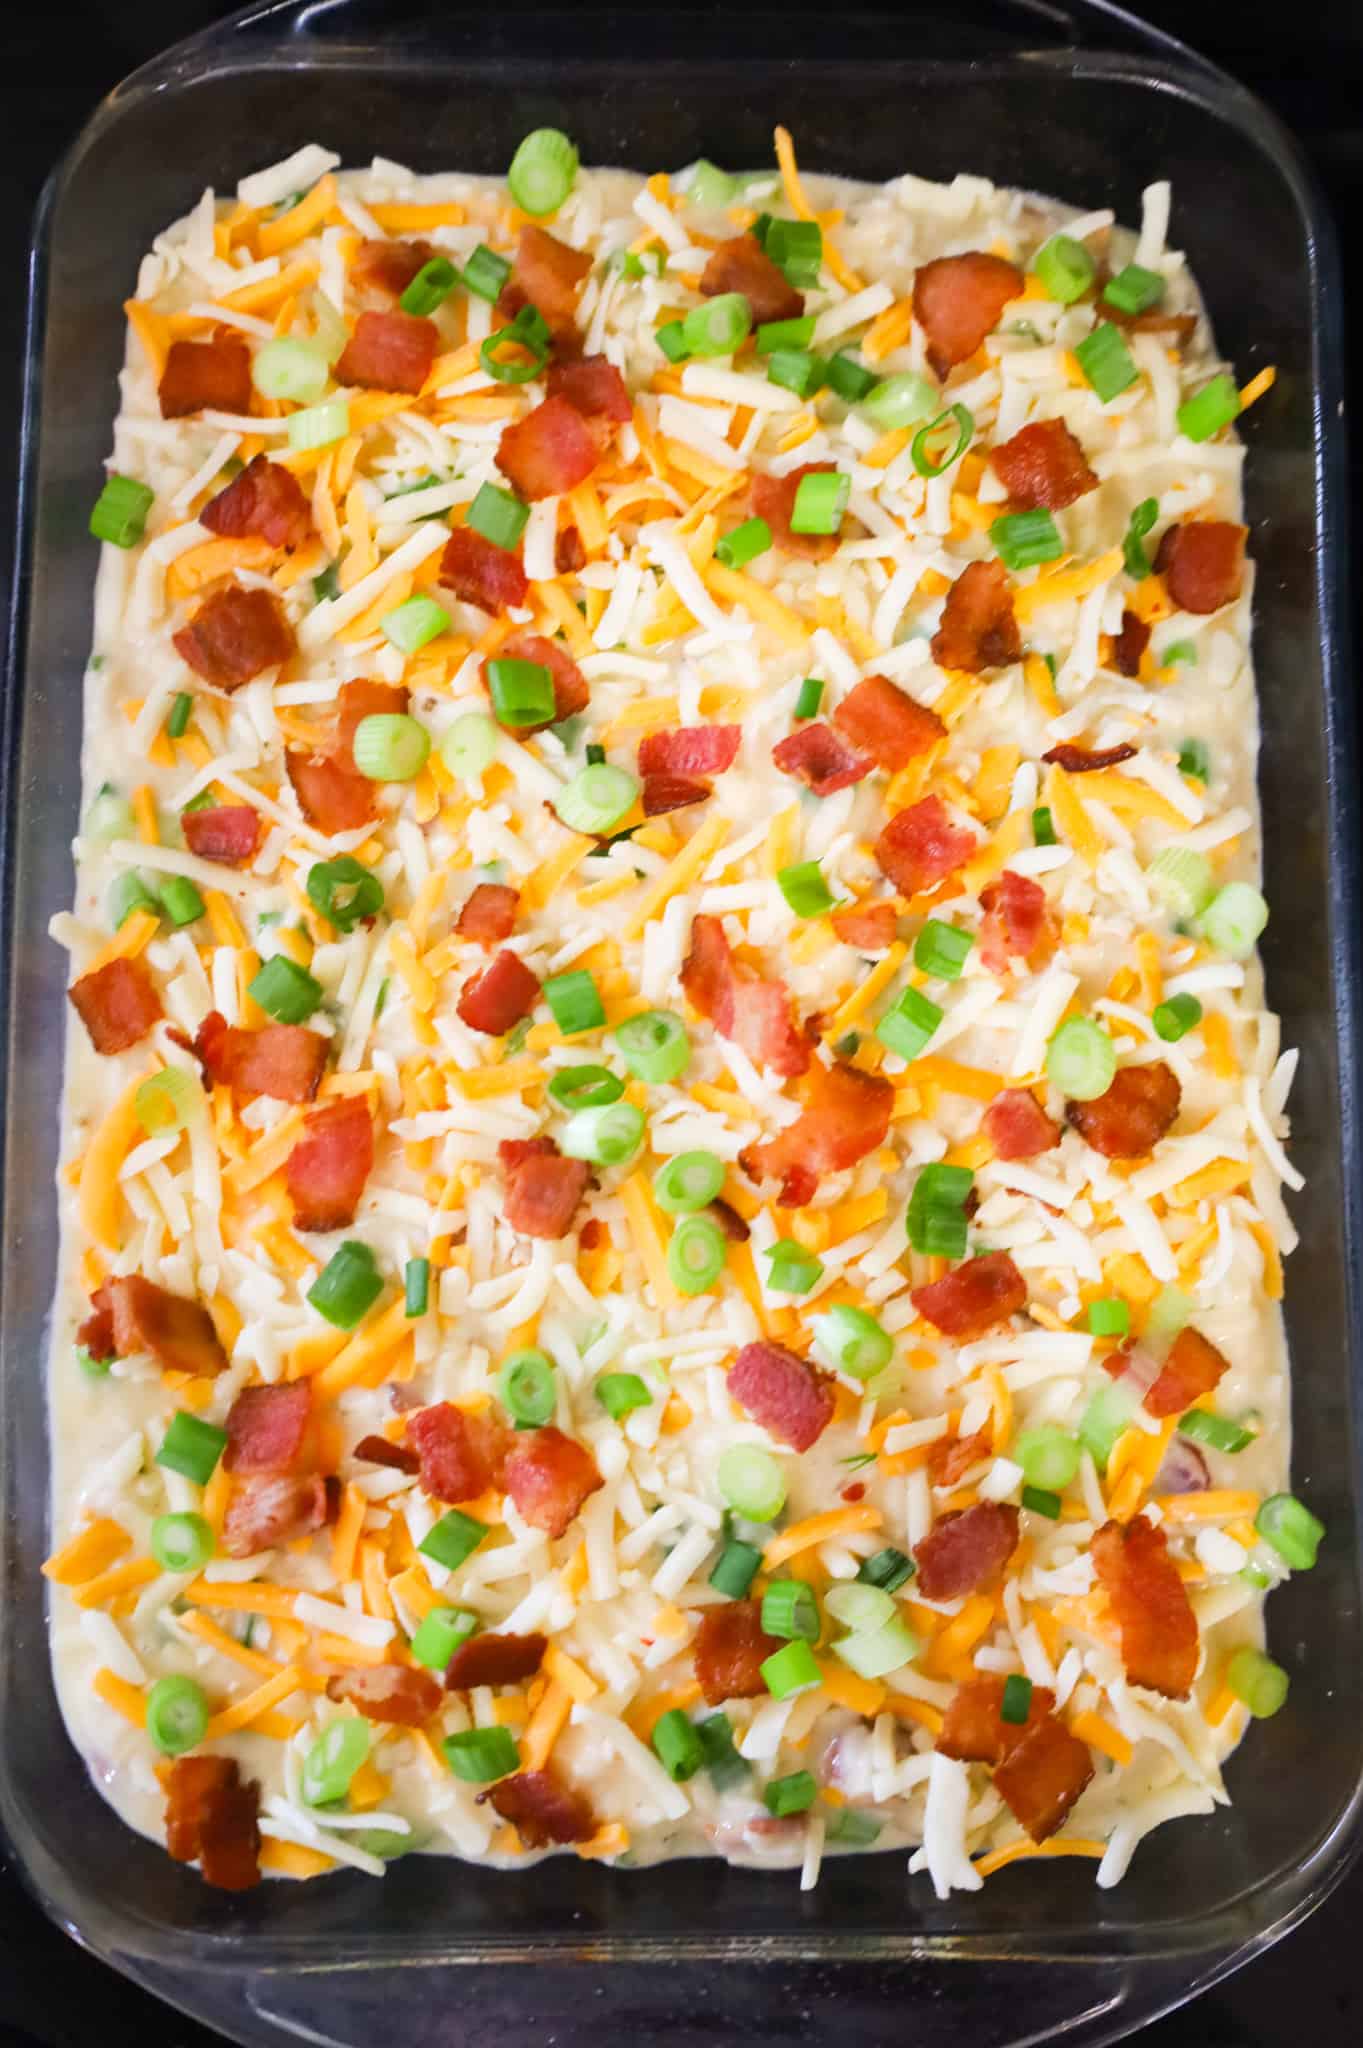 chopped bacon, green onions and shredded cheese on top of chicken bacon rice mixture in a baking dish